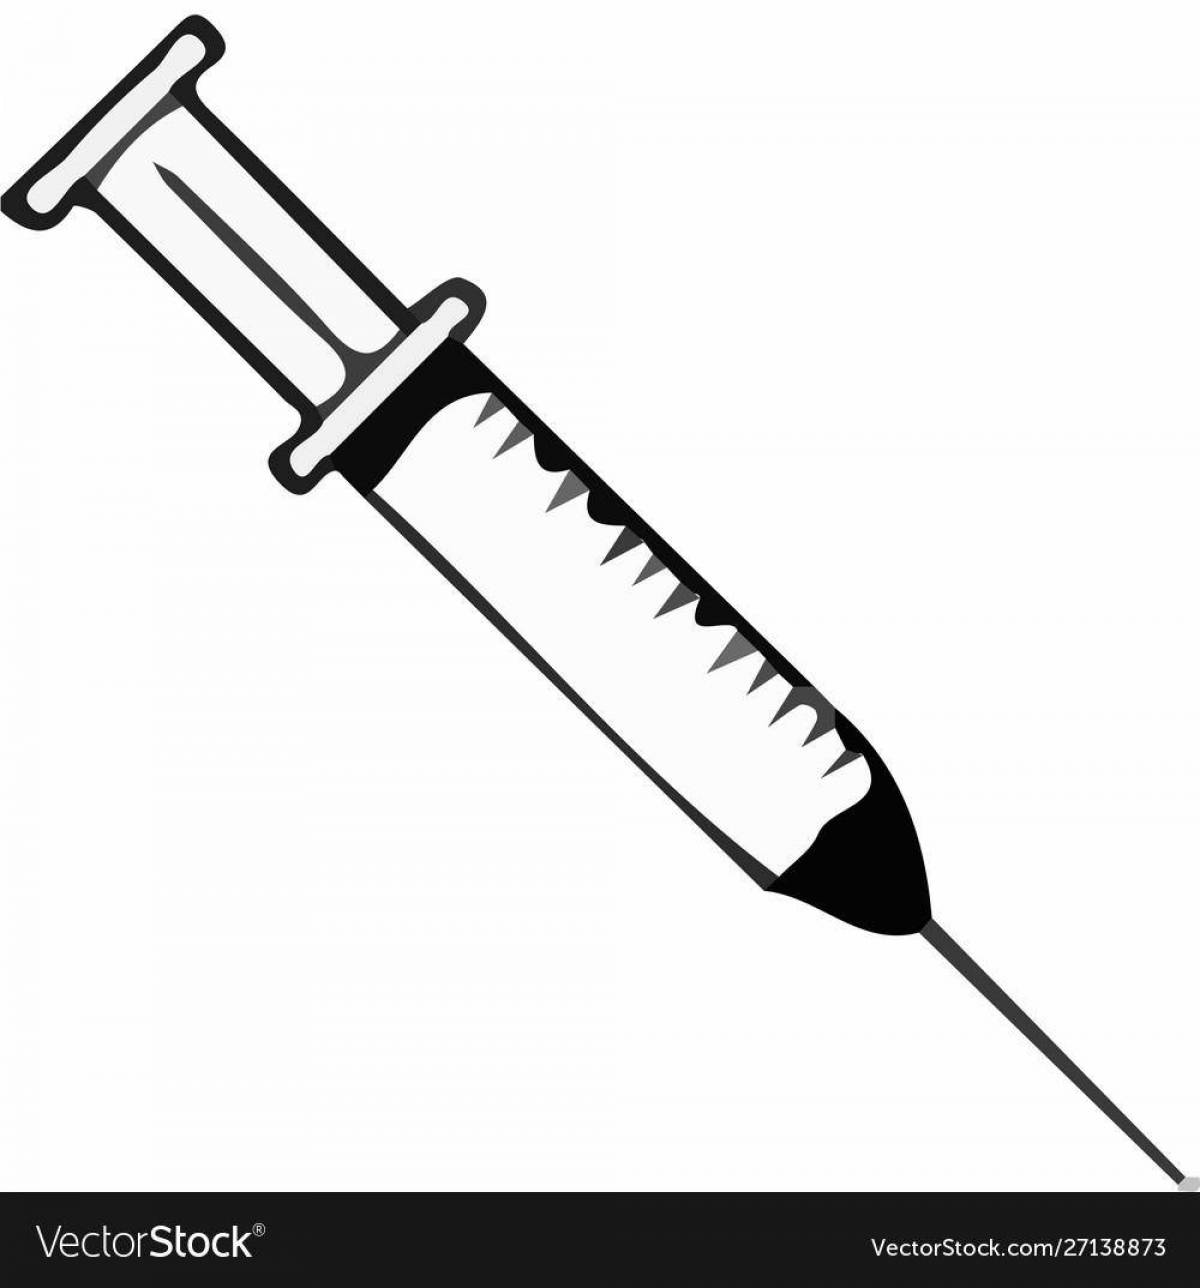 Glowing Syringe Coloring Page for Toddlers